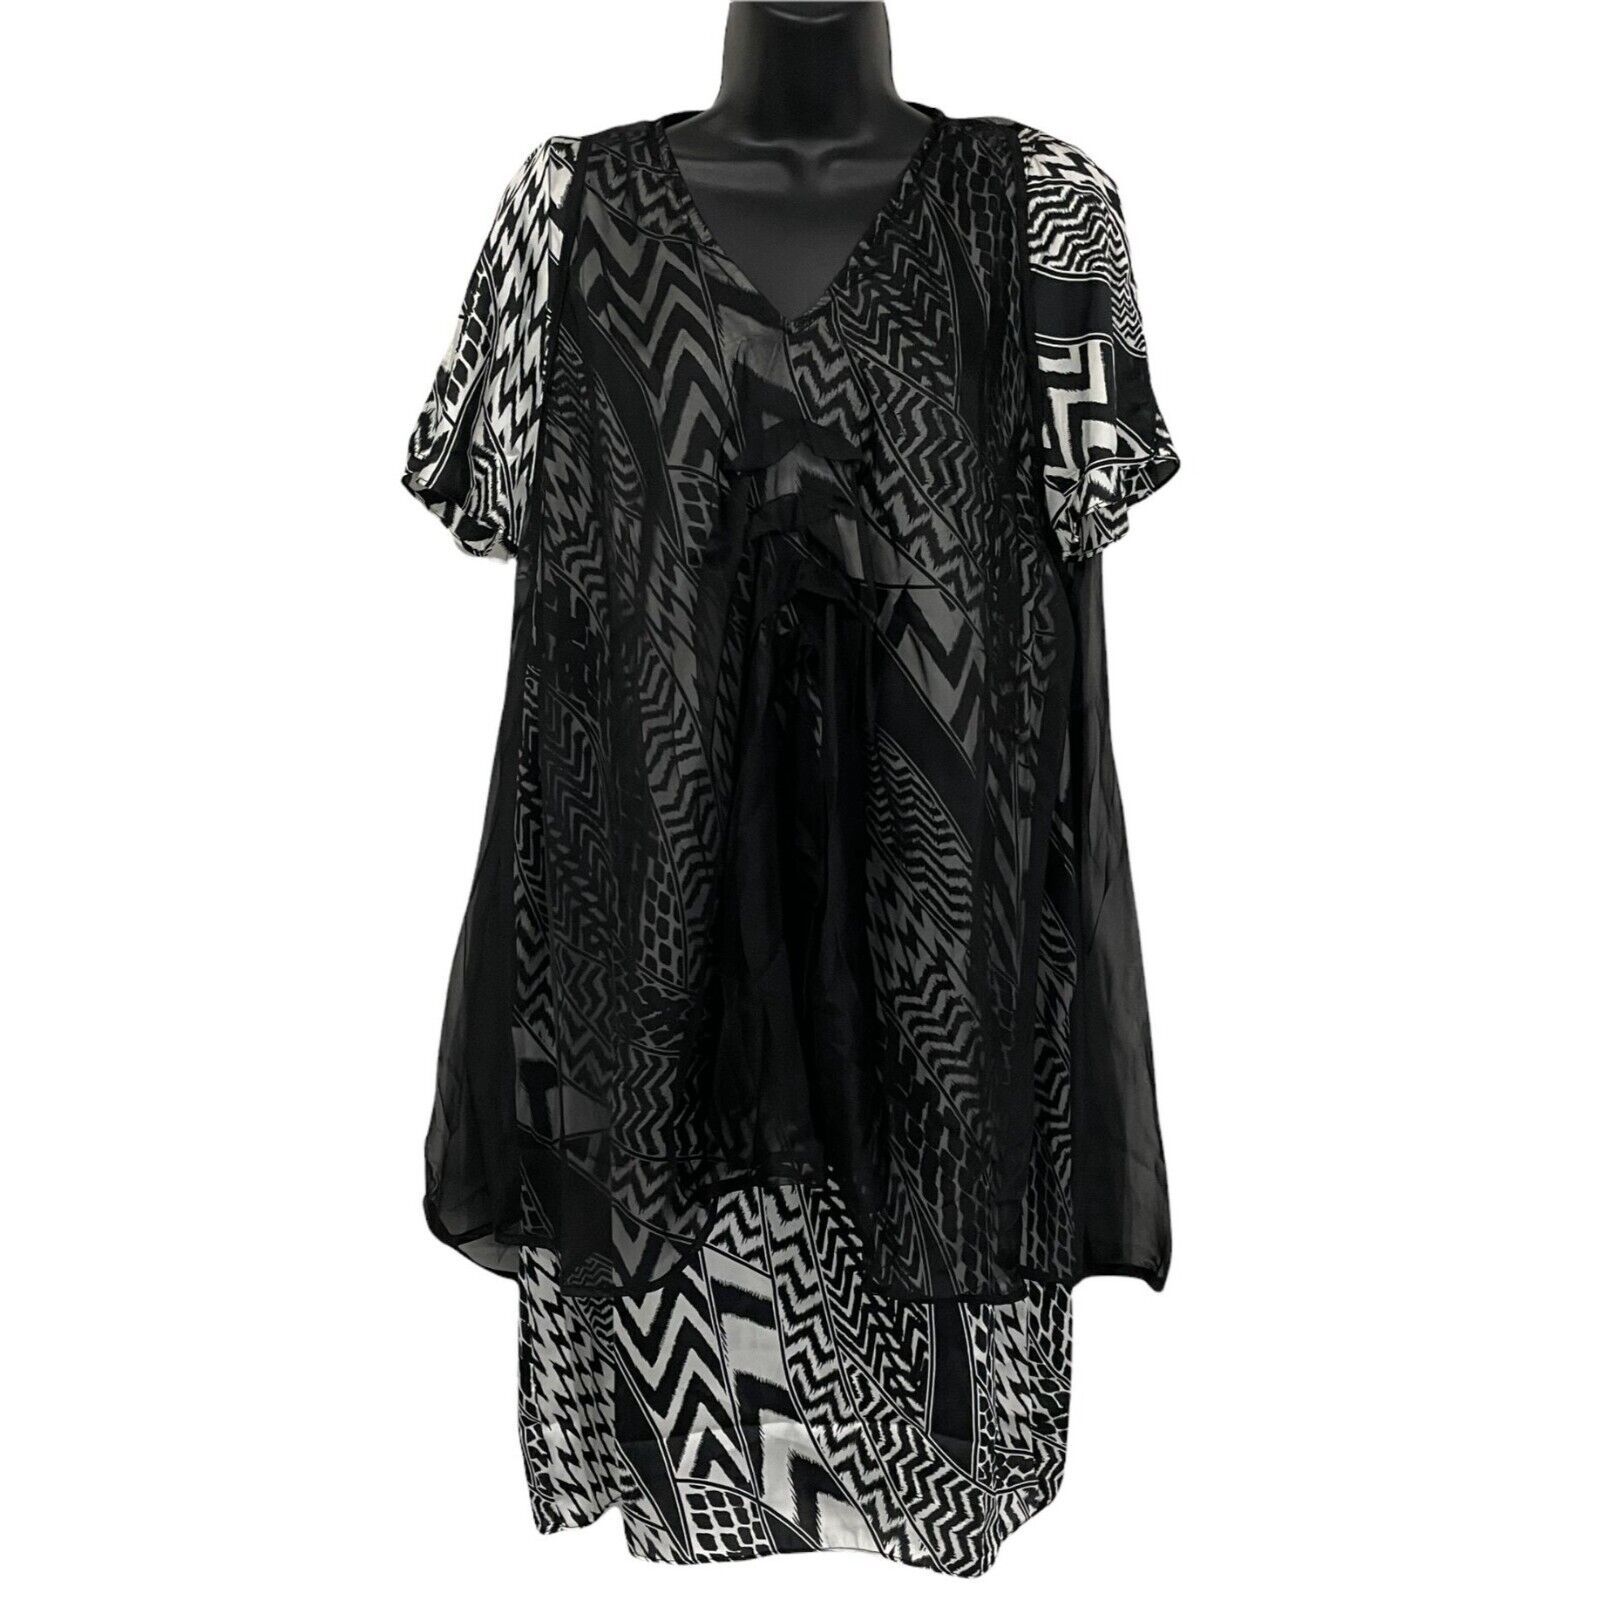 Primary image for Jerry T New York Dress Black White Geometric Sheer Overlay Size Small